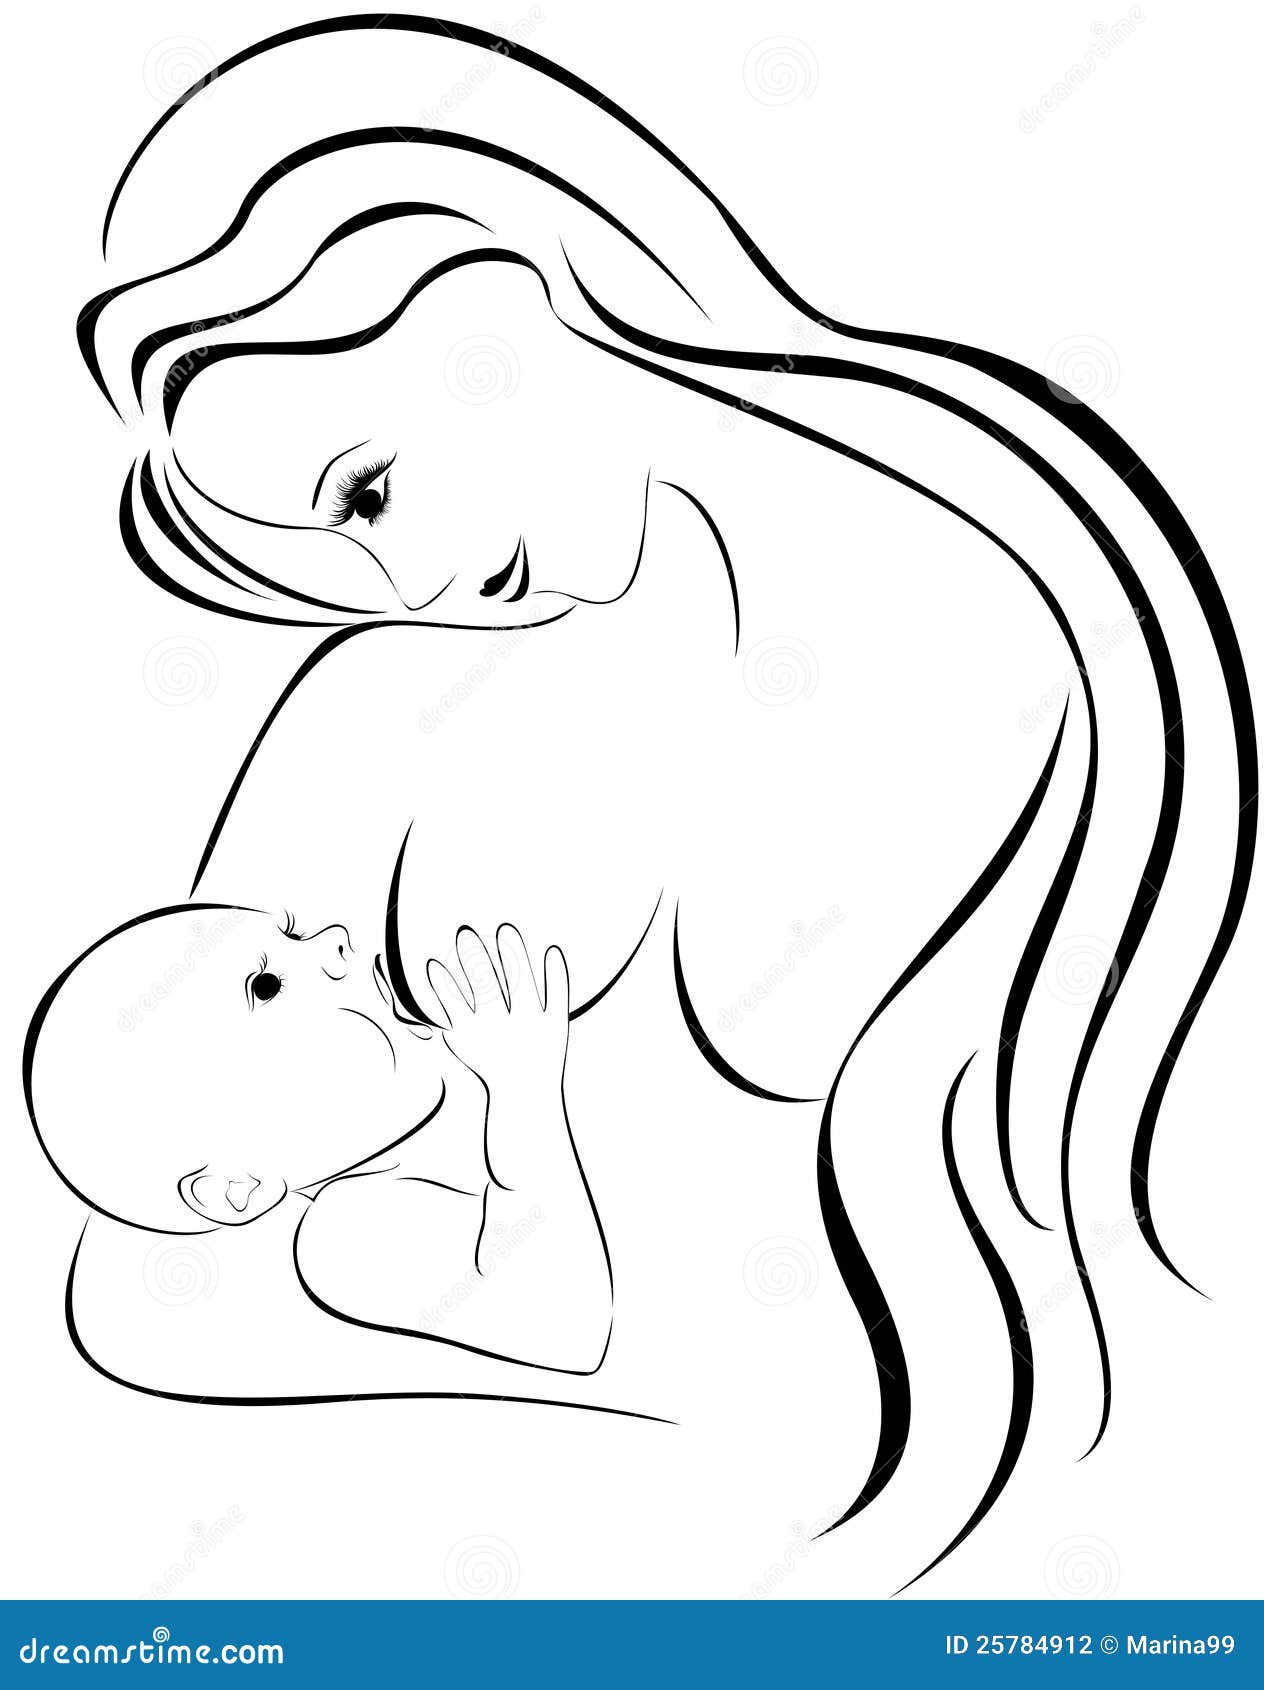 clipart of mother feeding baby - photo #45